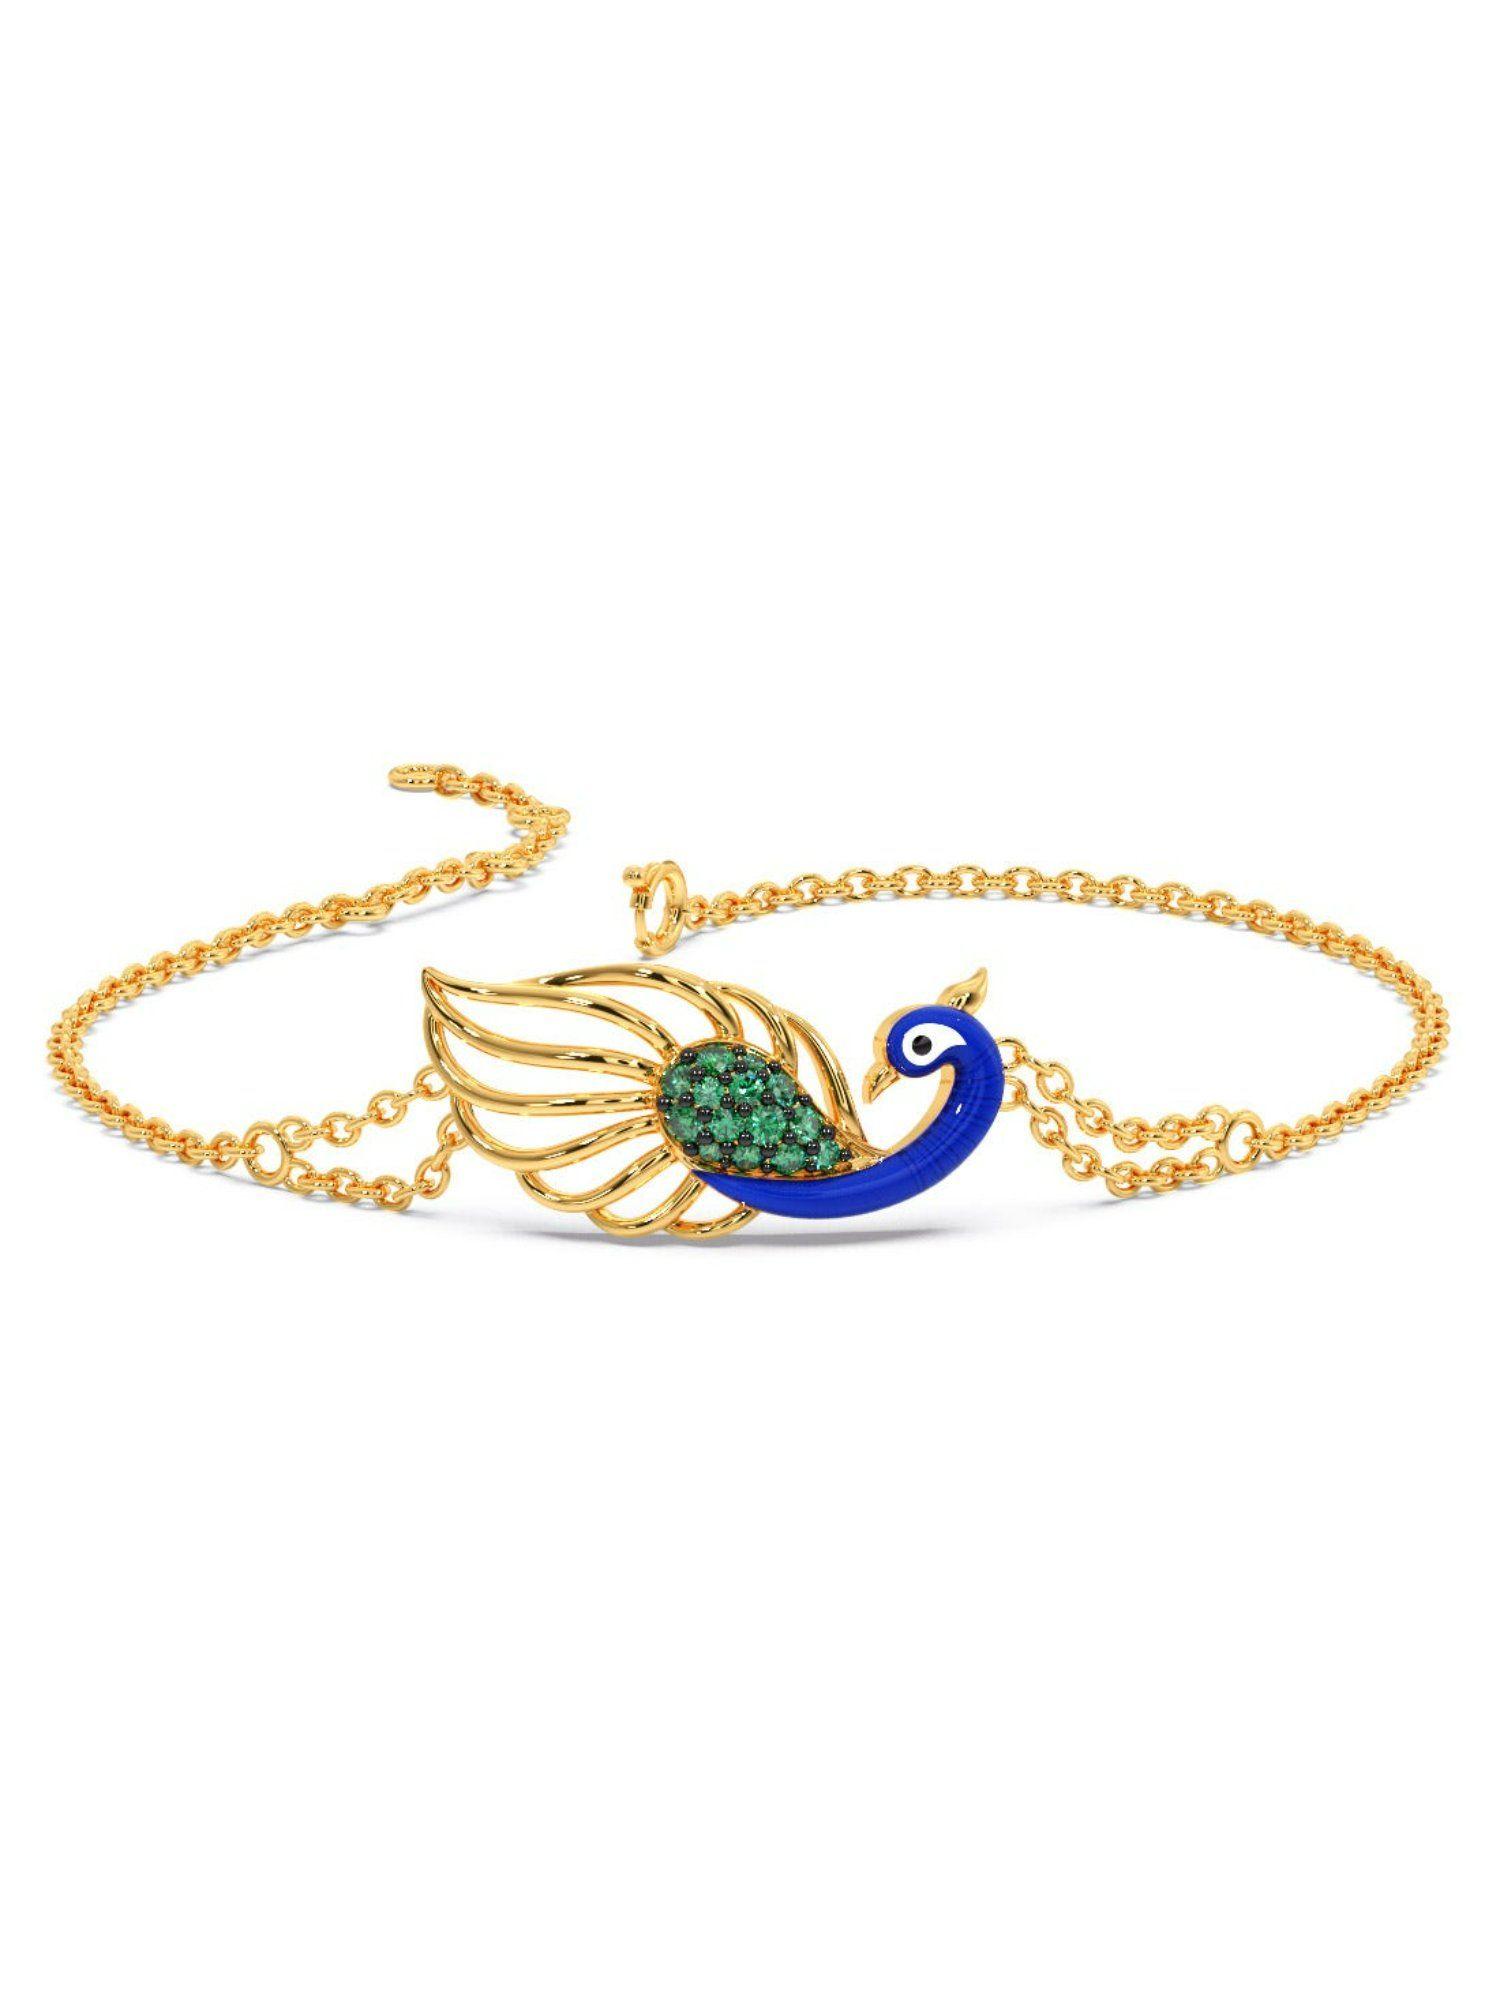 peacock collection 14k (585) yellow gold with gemstone bracelet